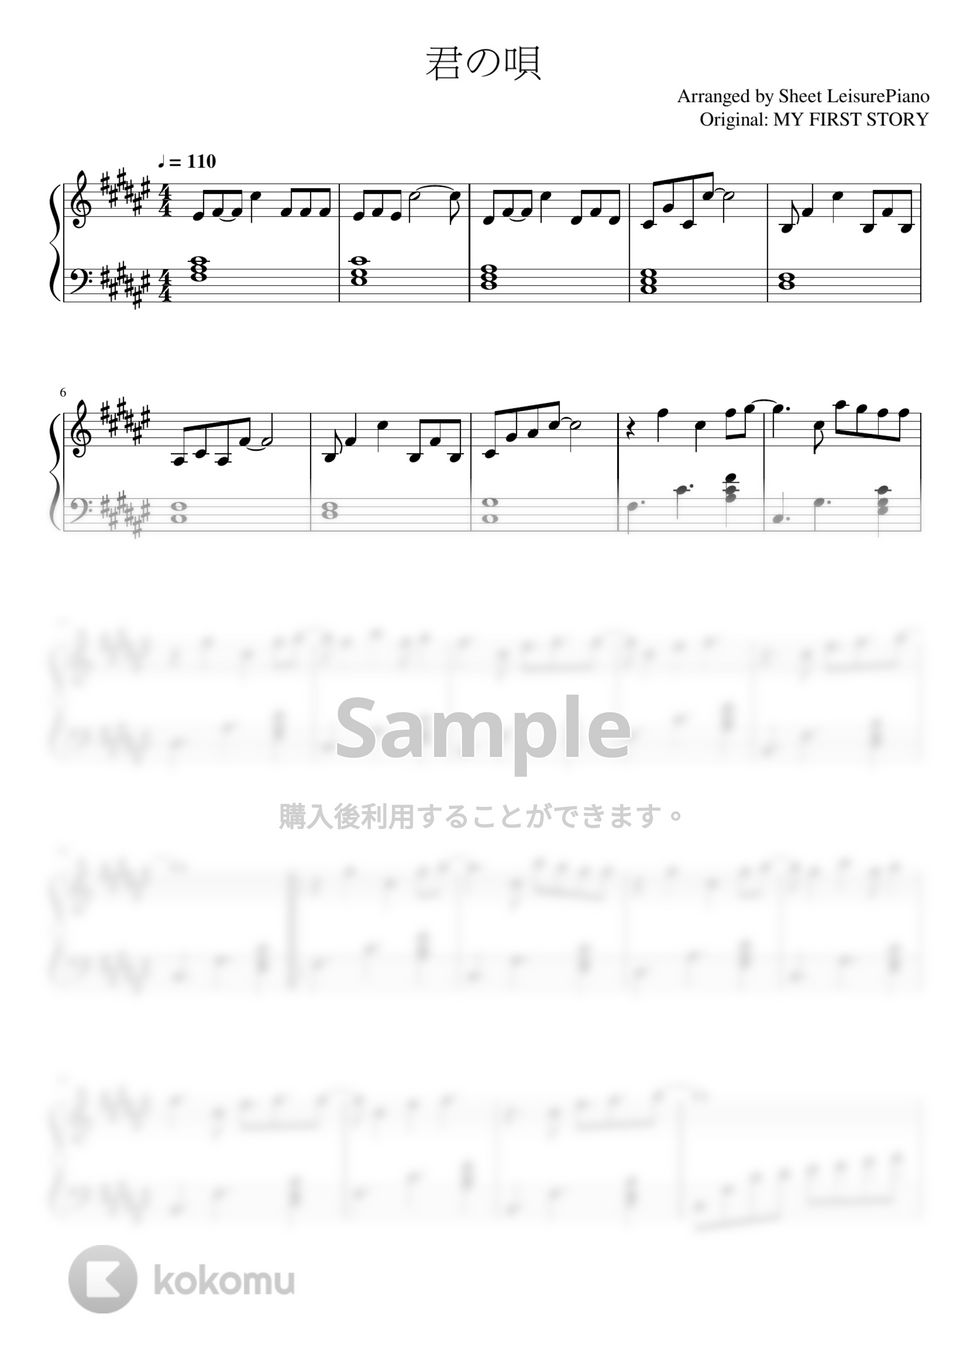 MyFirstStory - 君の呗 by Leisure (OOR Piano) Sheets